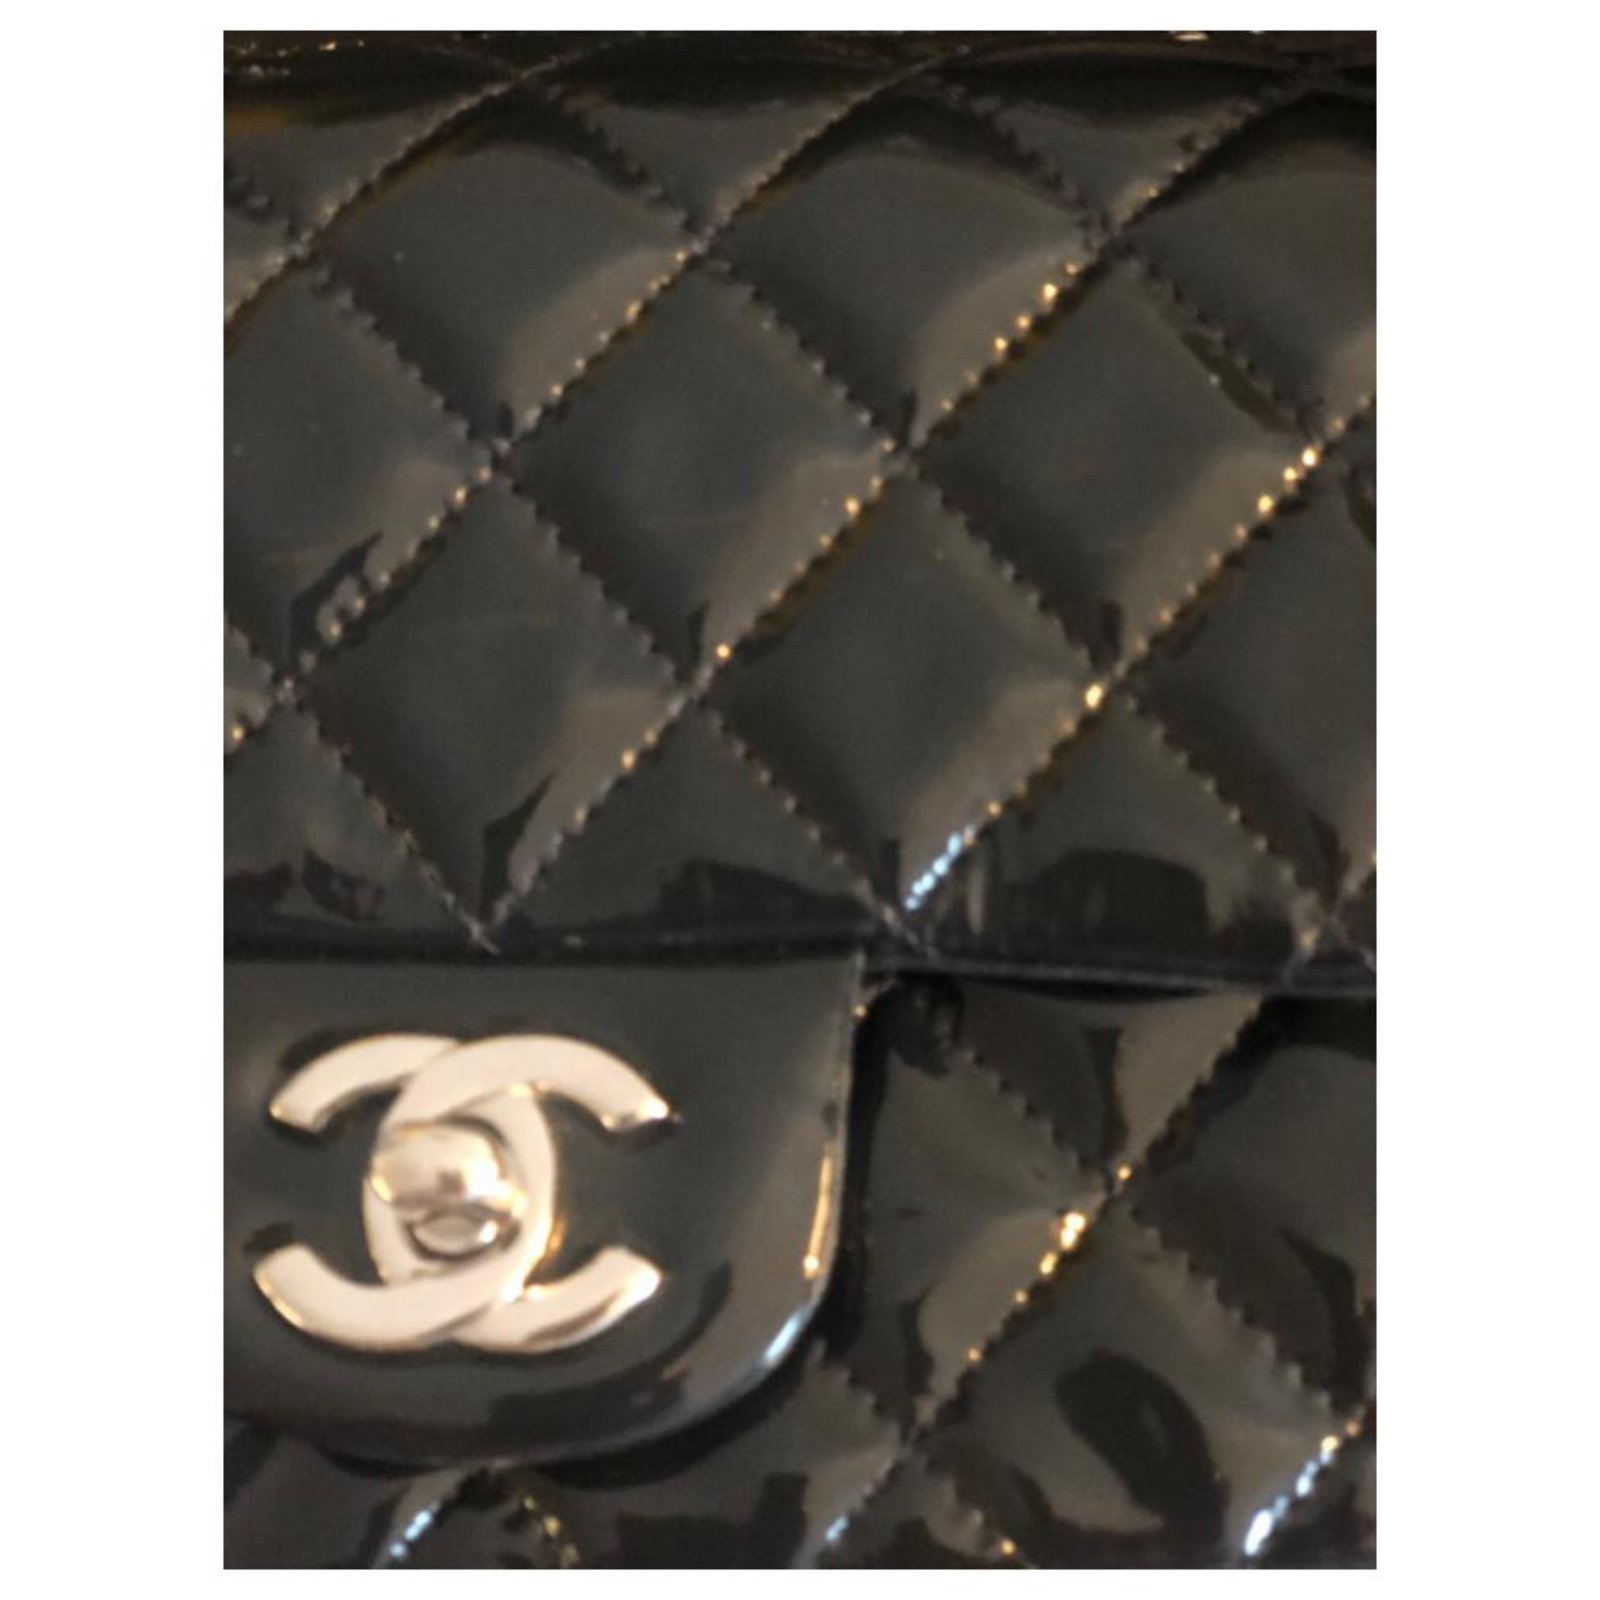 Chanel TIMELESS/CLASSIQUE LEATHER CROSSBODY BAG